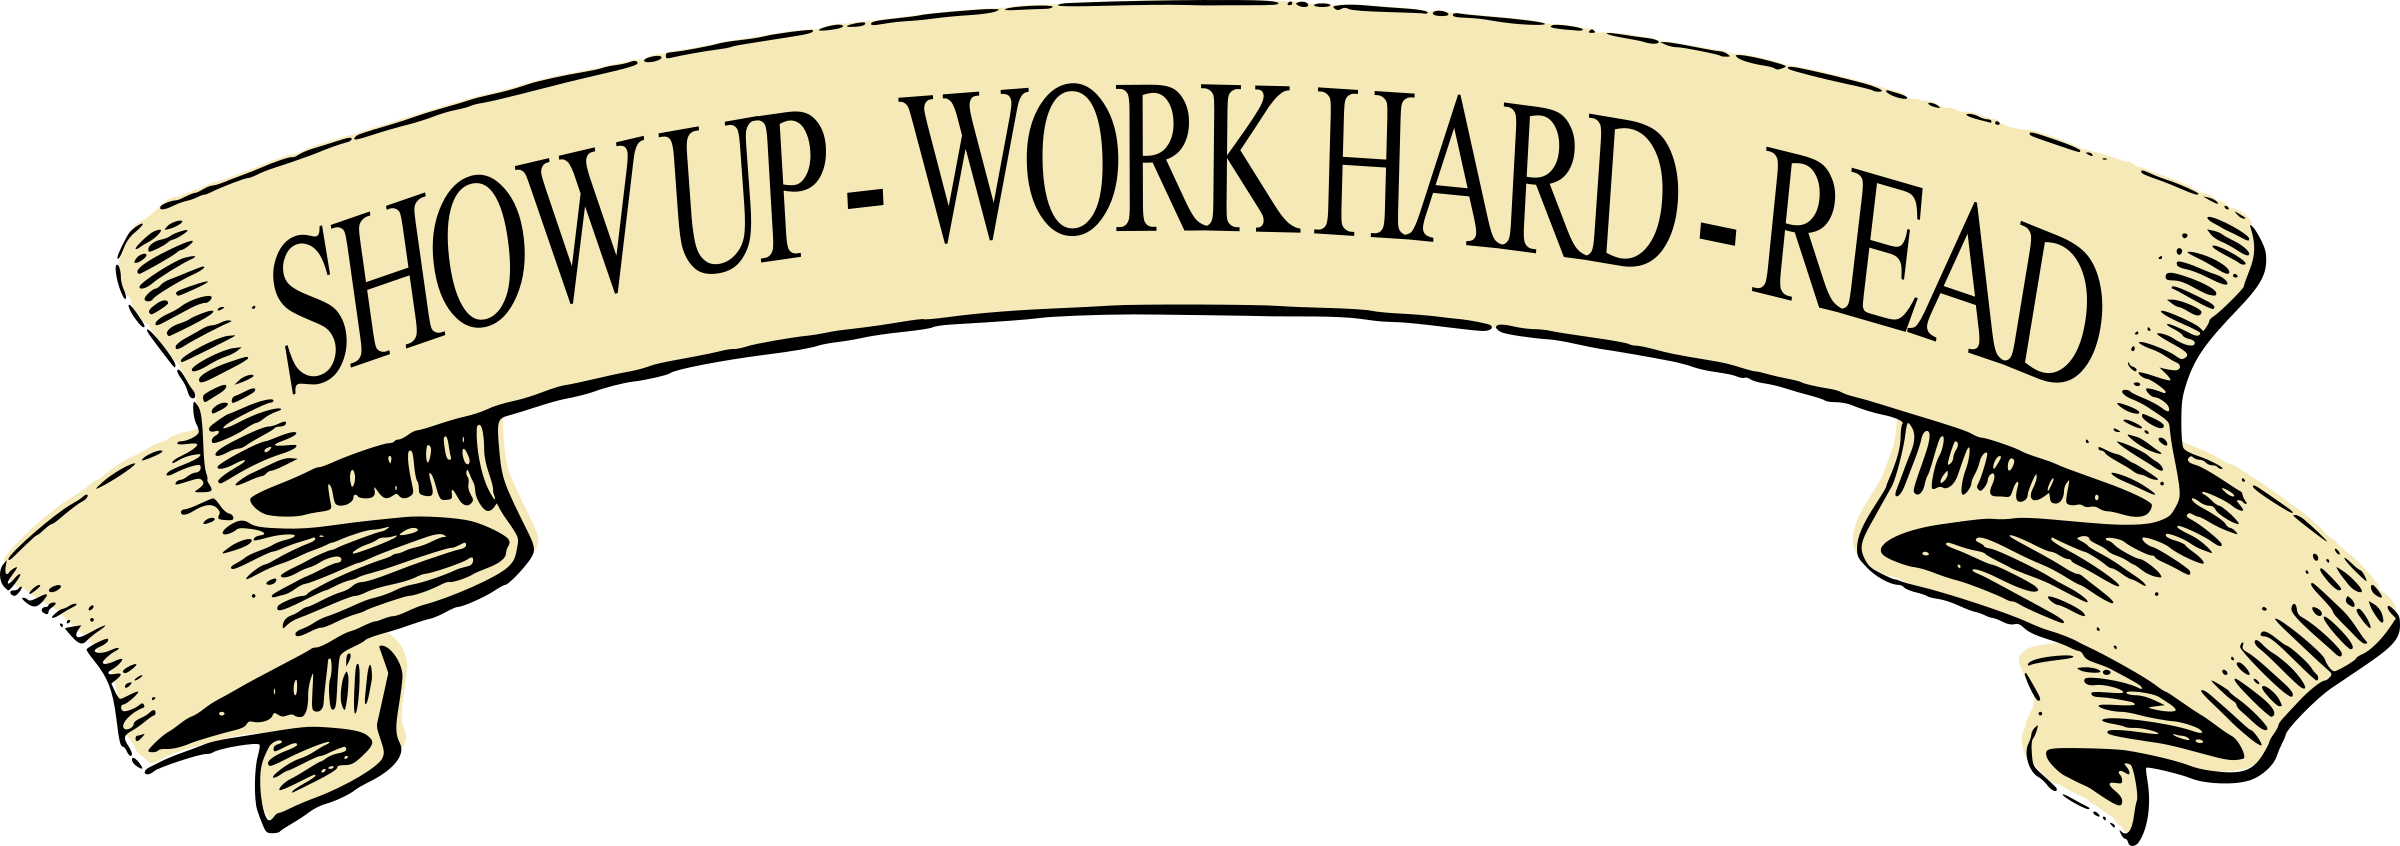 Up Work Hard Read Banner - Ribbon Vector Black And White (2400x846)